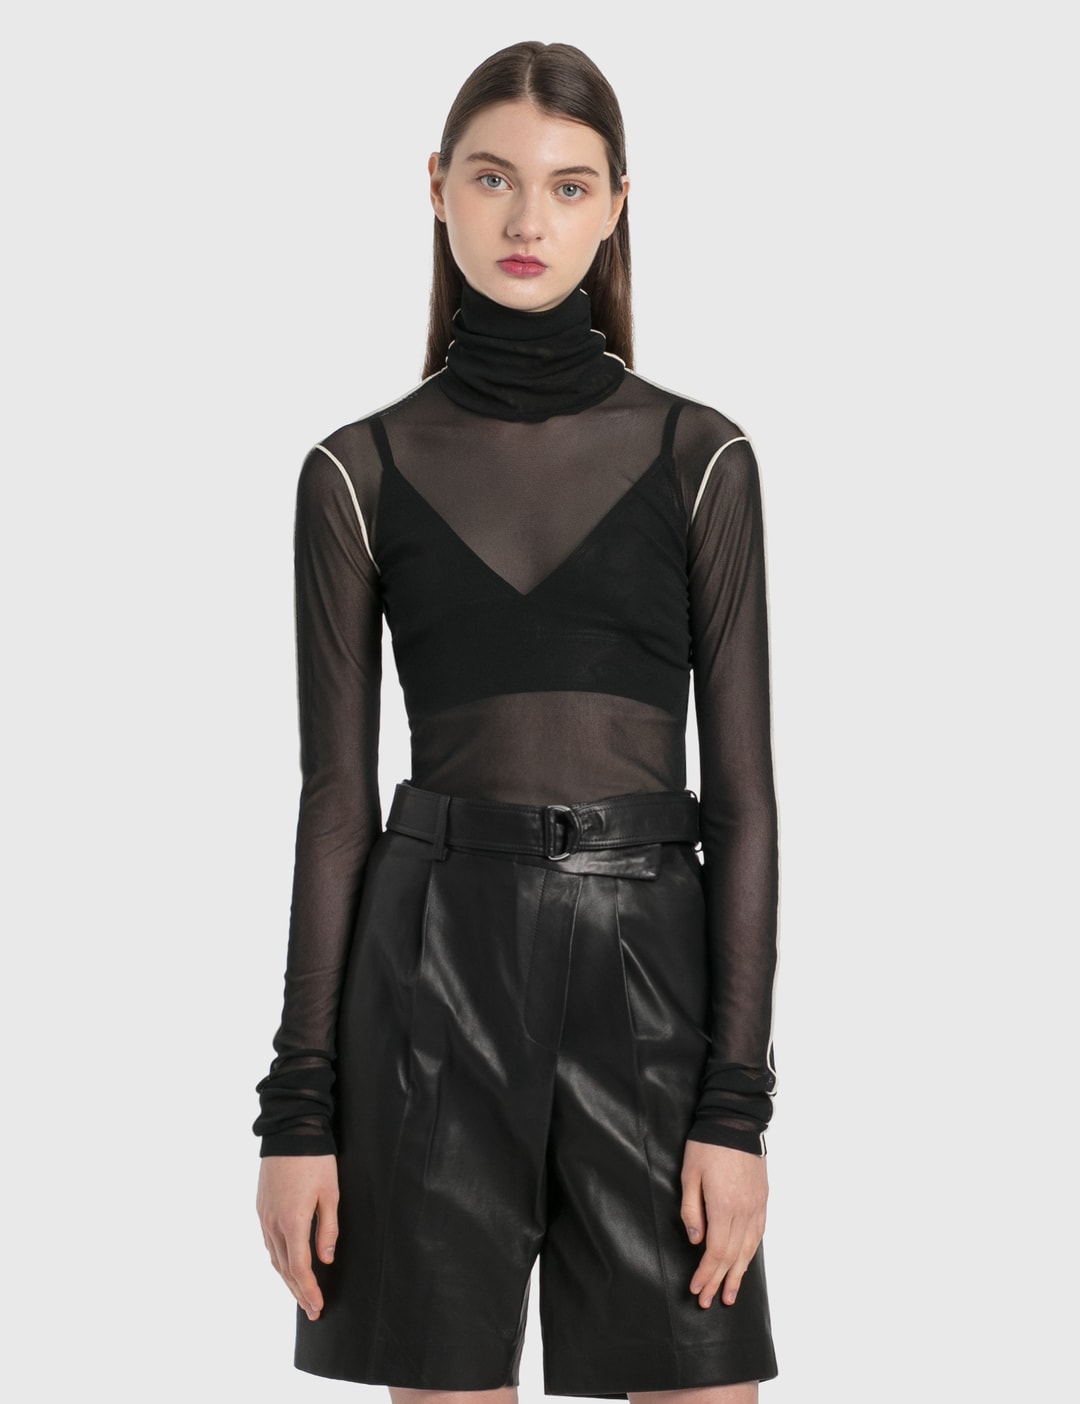 Helmut Lang - Sheer Long Sleeve Top | HBX - Globally Curated Fashion ...